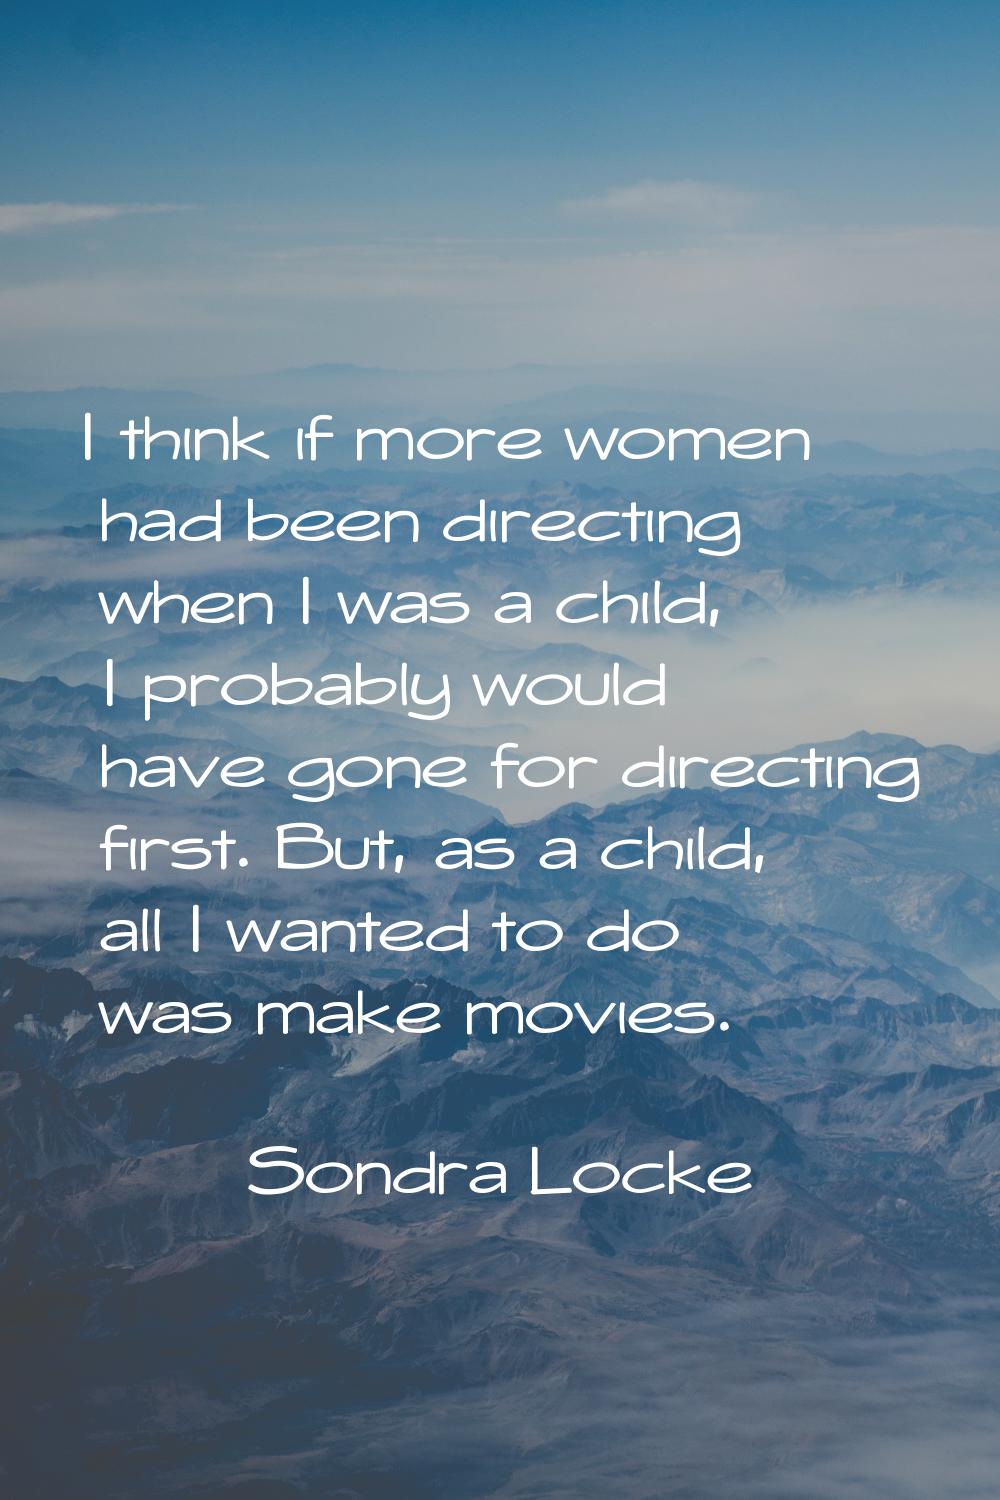 I think if more women had been directing when I was a child, I probably would have gone for directi